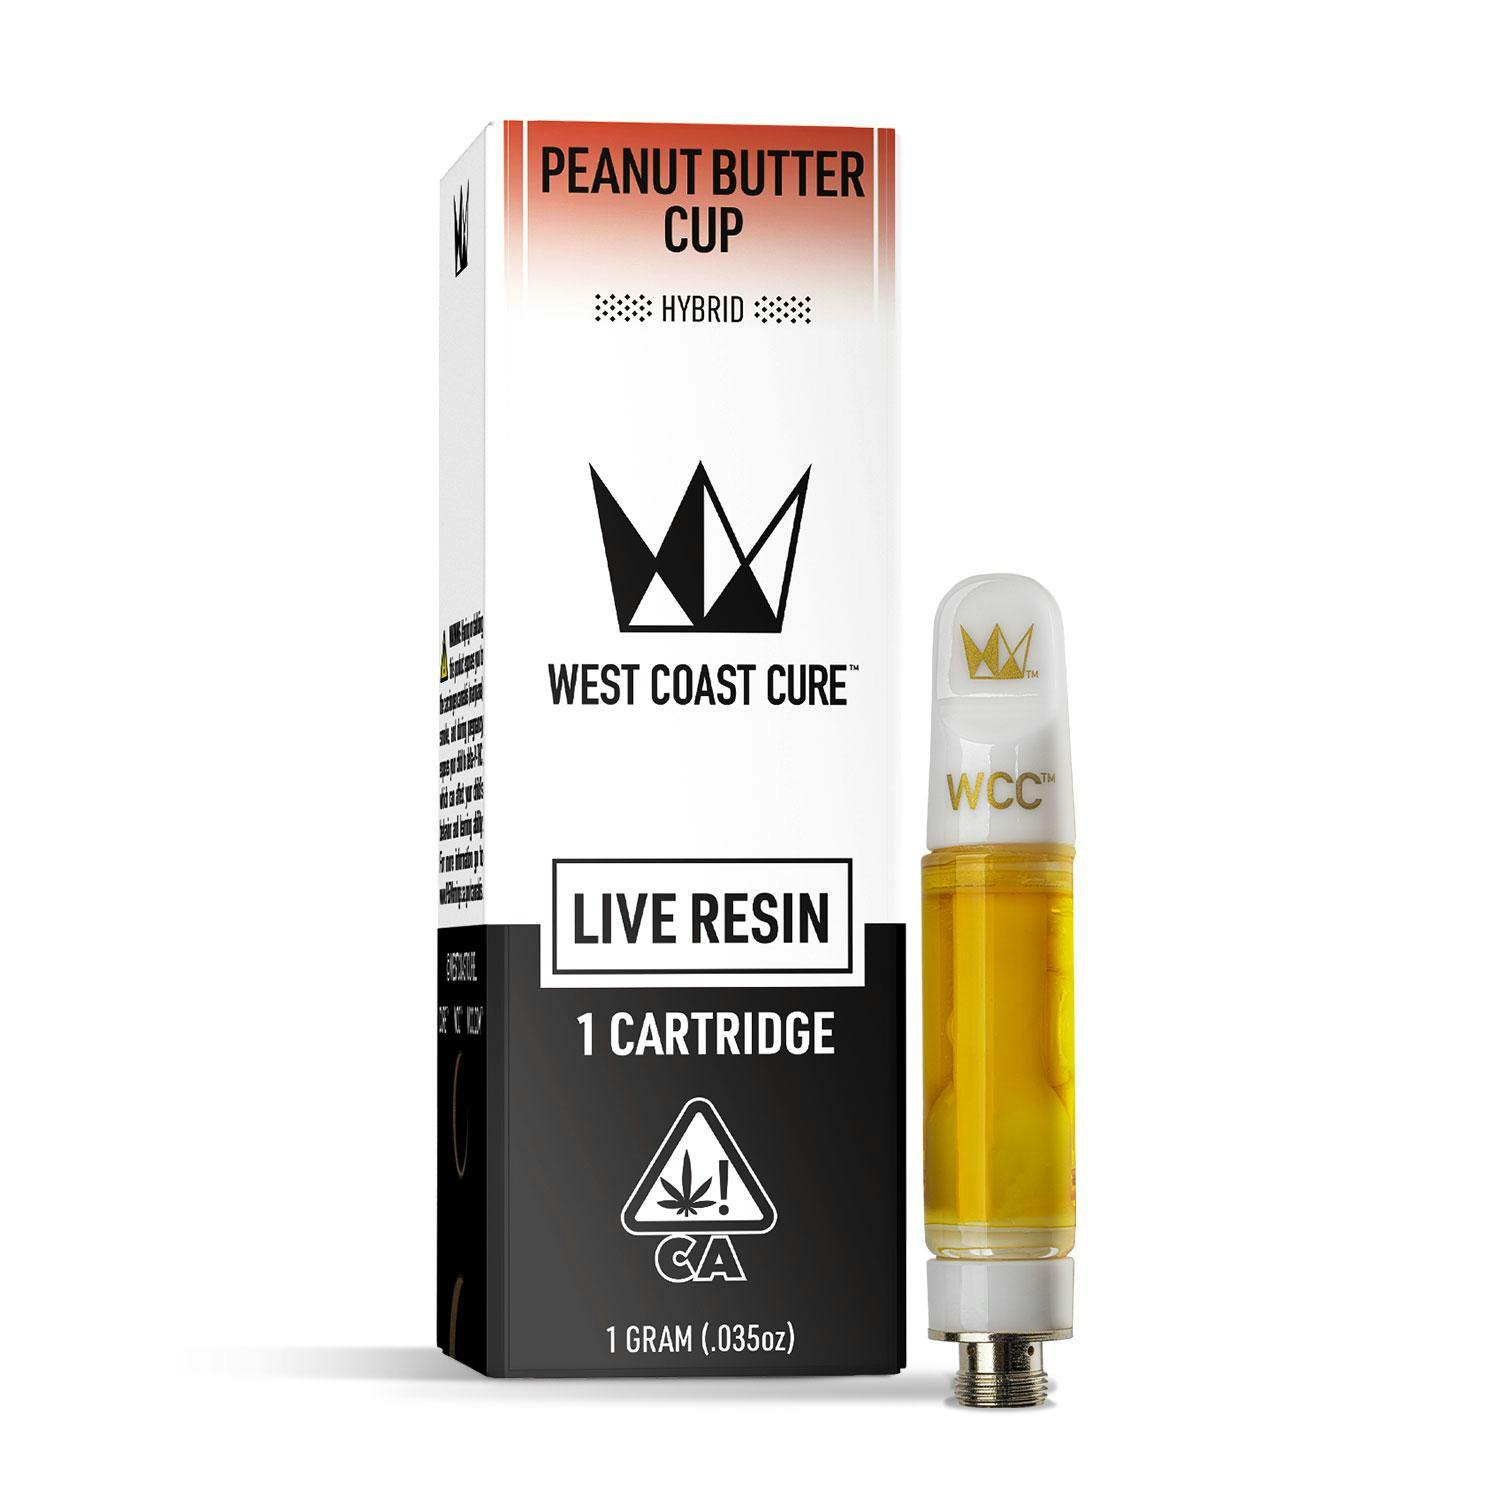 Peanut Butter Cup Live Resin Cartridge - 1g